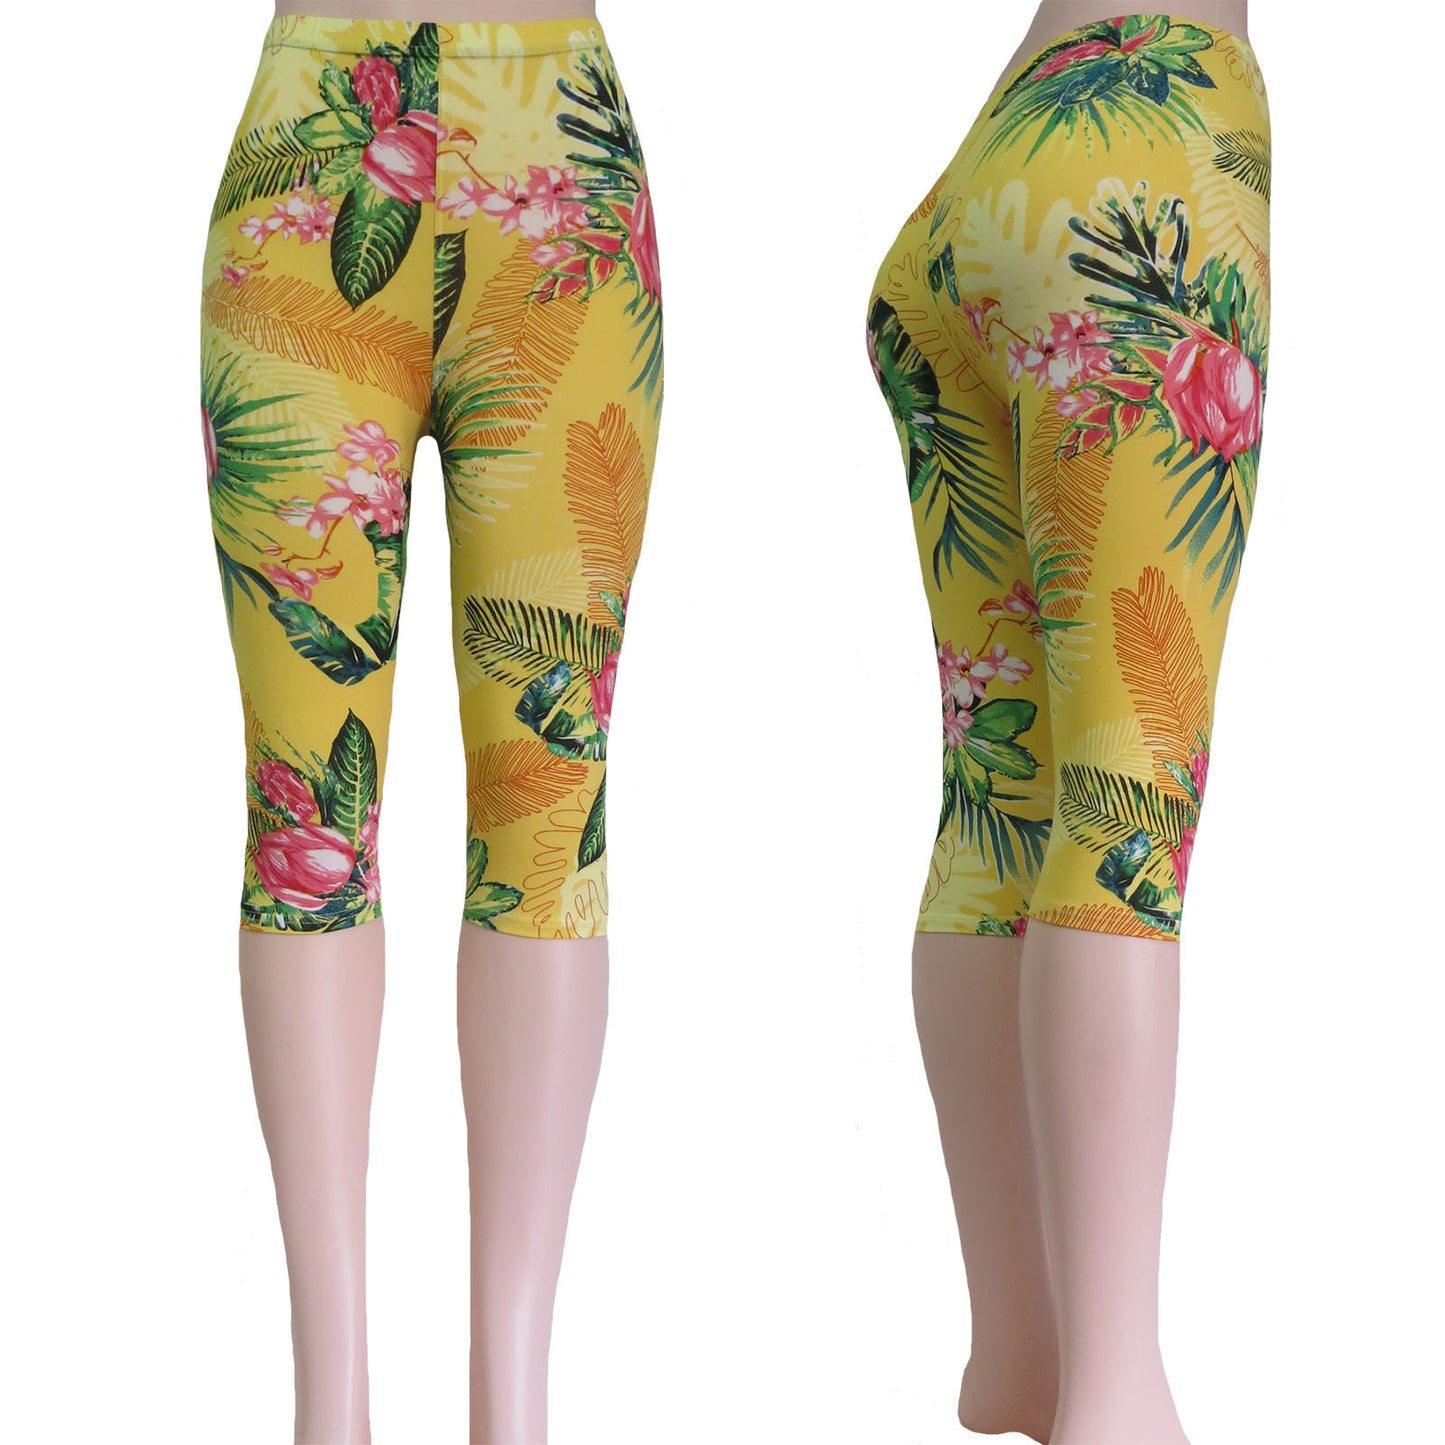 ITEM NUMBER: AP730-CANDY (12 PIECE PACK WAS $2.75 - CLEARANCE SALE JUST $1.50 / PIECE) FLOWER PATTERN CAPRI LEGGINGS